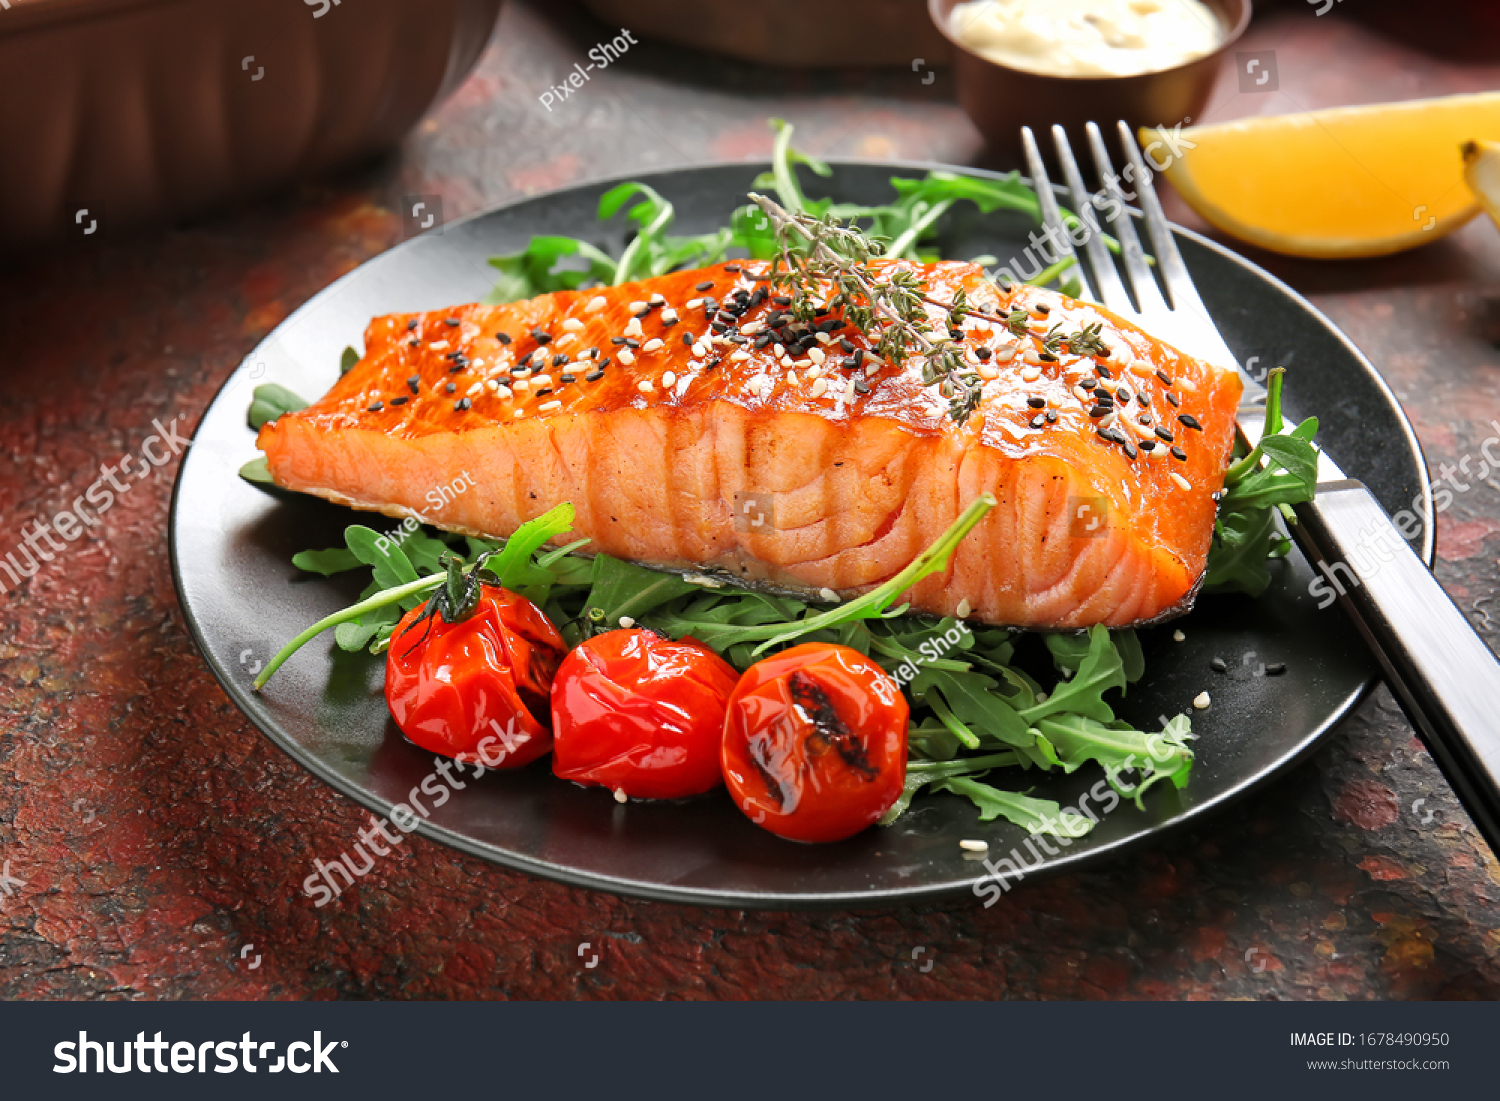 Plate with cooked salmon fillet on color background #1678490950